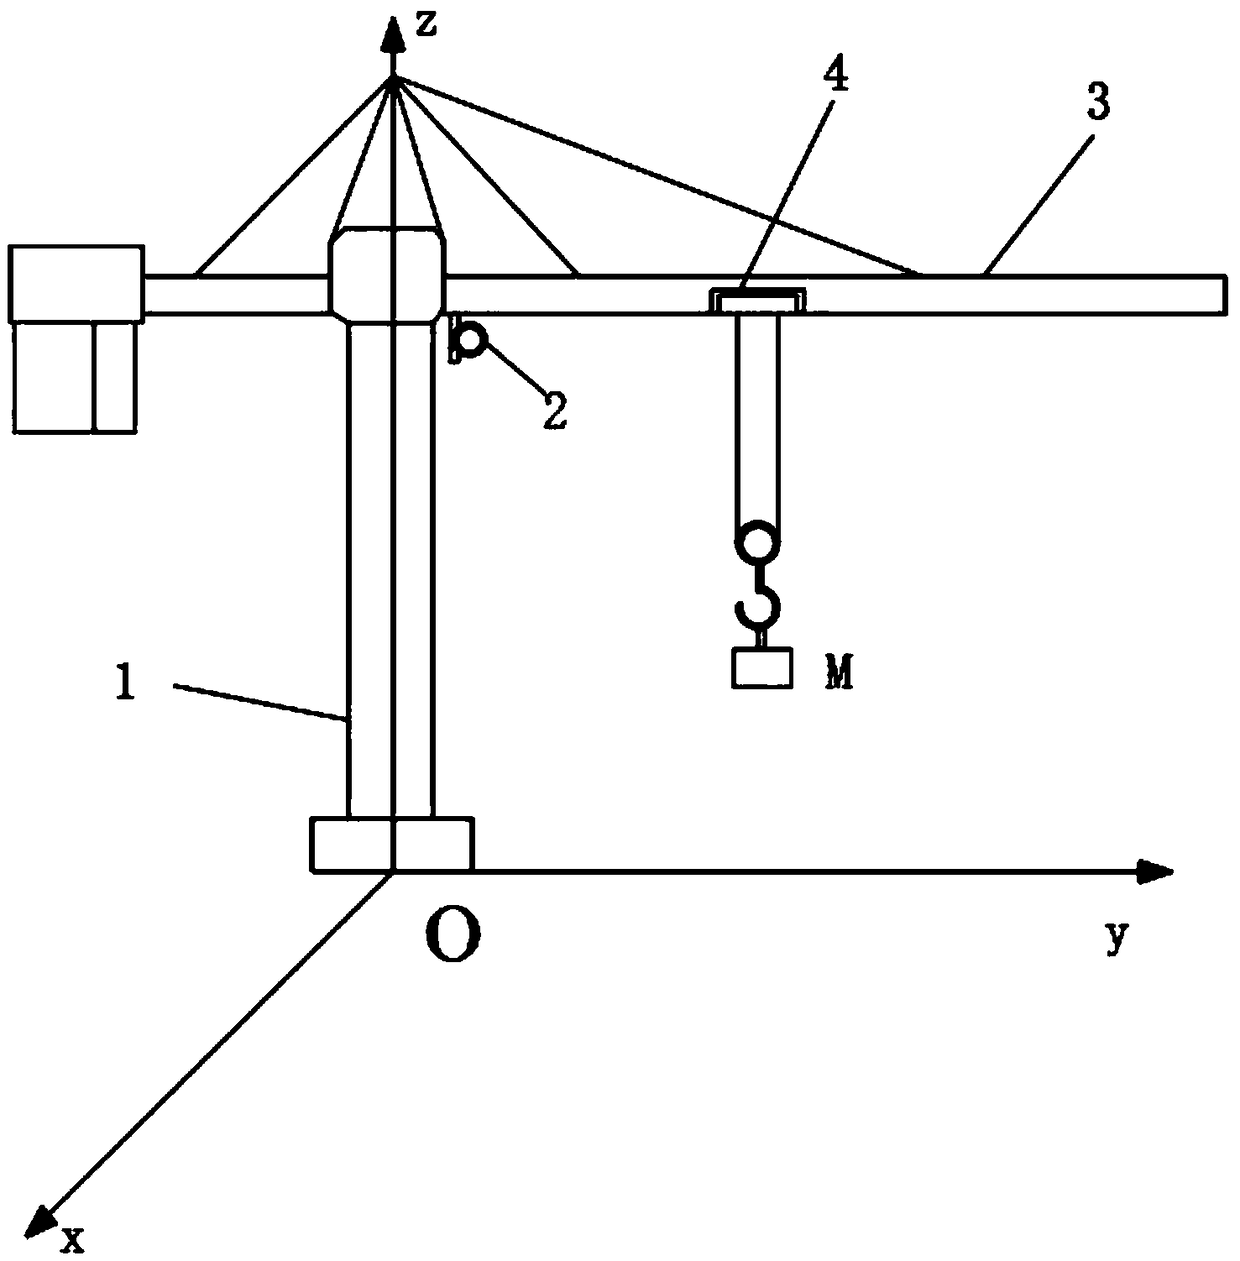 A spatial positioning method of tower crane based on machine vision